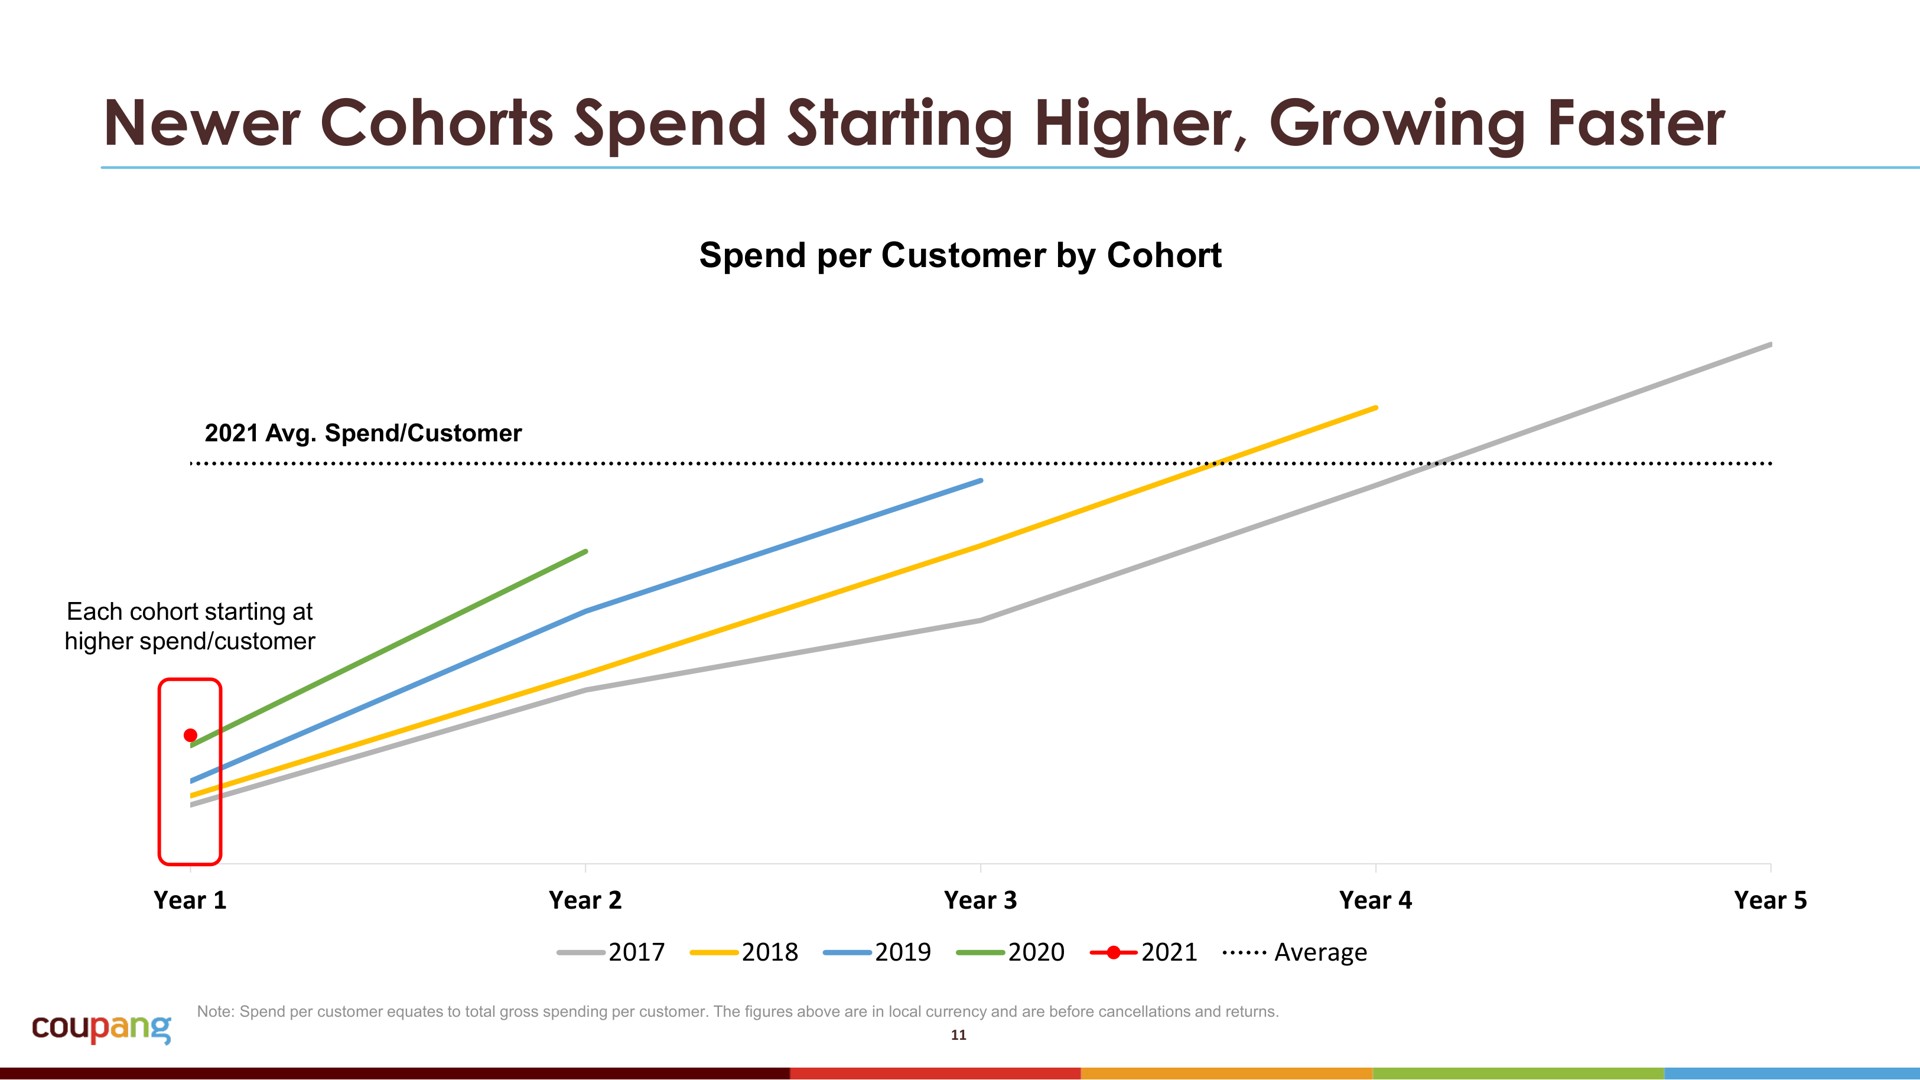 cohorts spend starting higher growing faster | Coupang